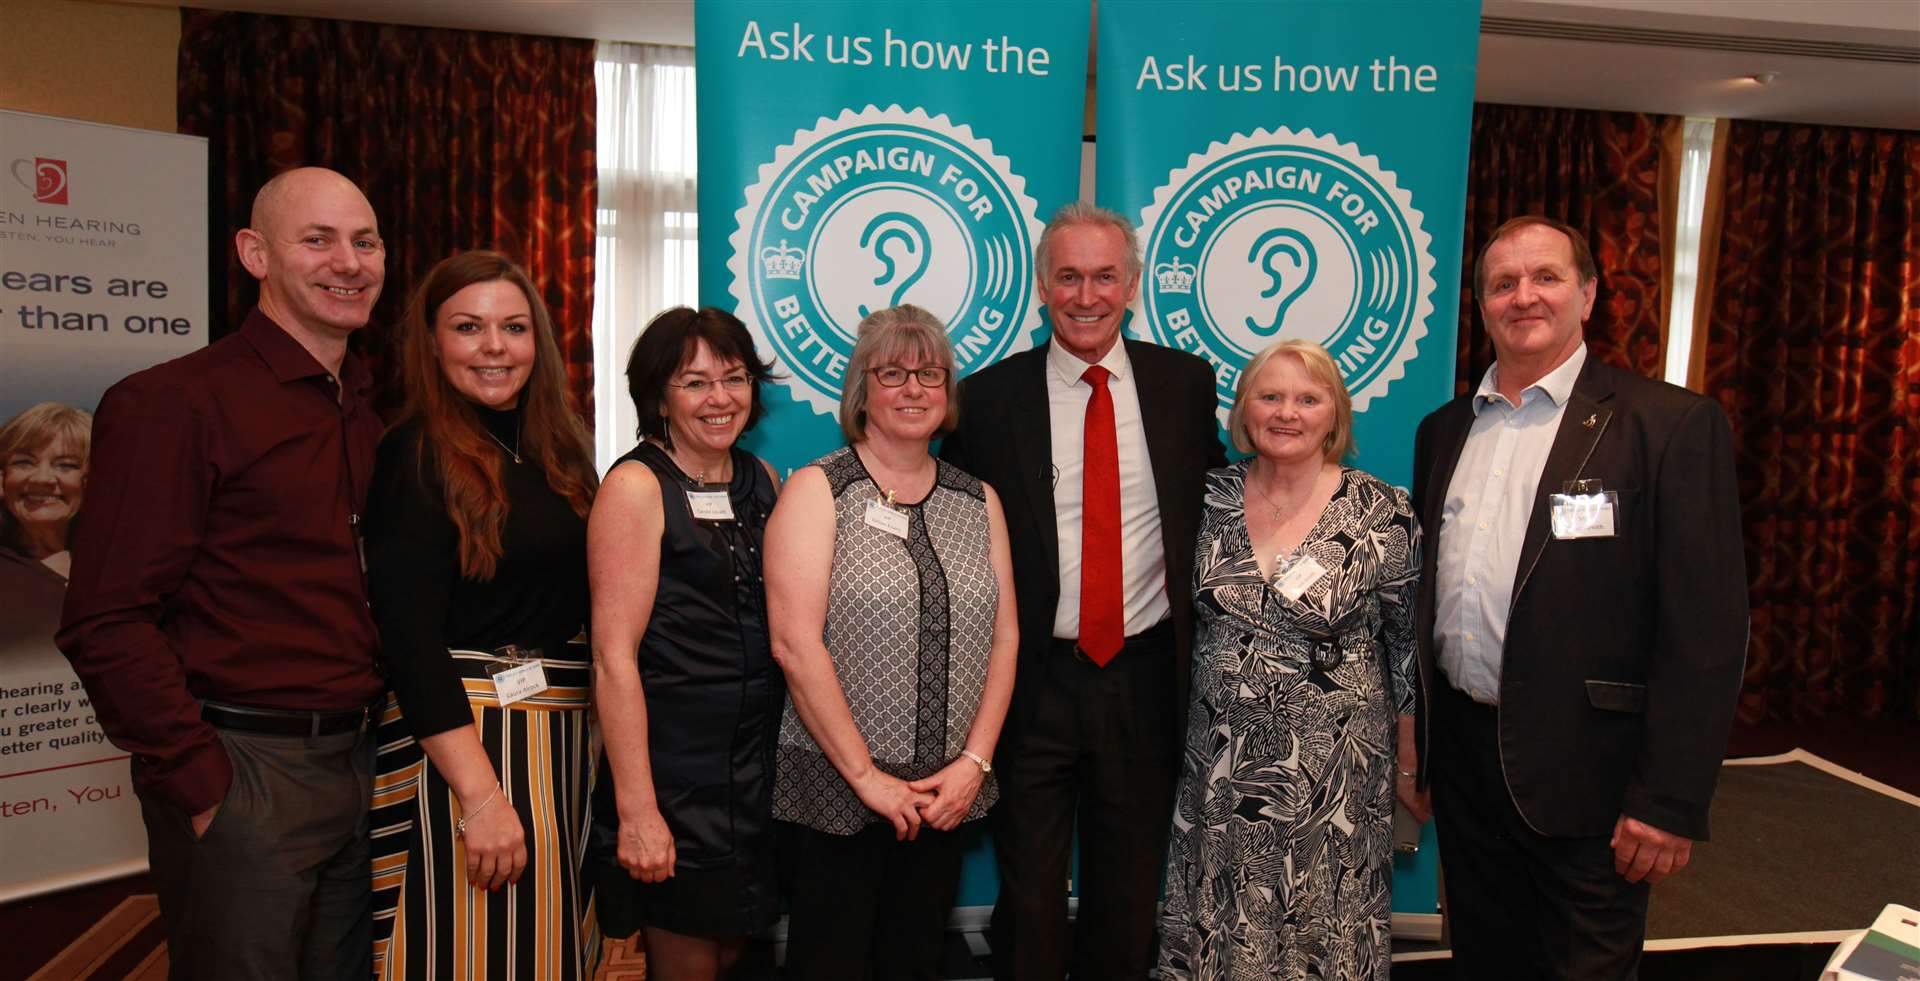 Dr Hilary Jones greets some worthy recipients of free hearing aids awarded by the Campaign for Better Hearing at the recent event in Maidstone.